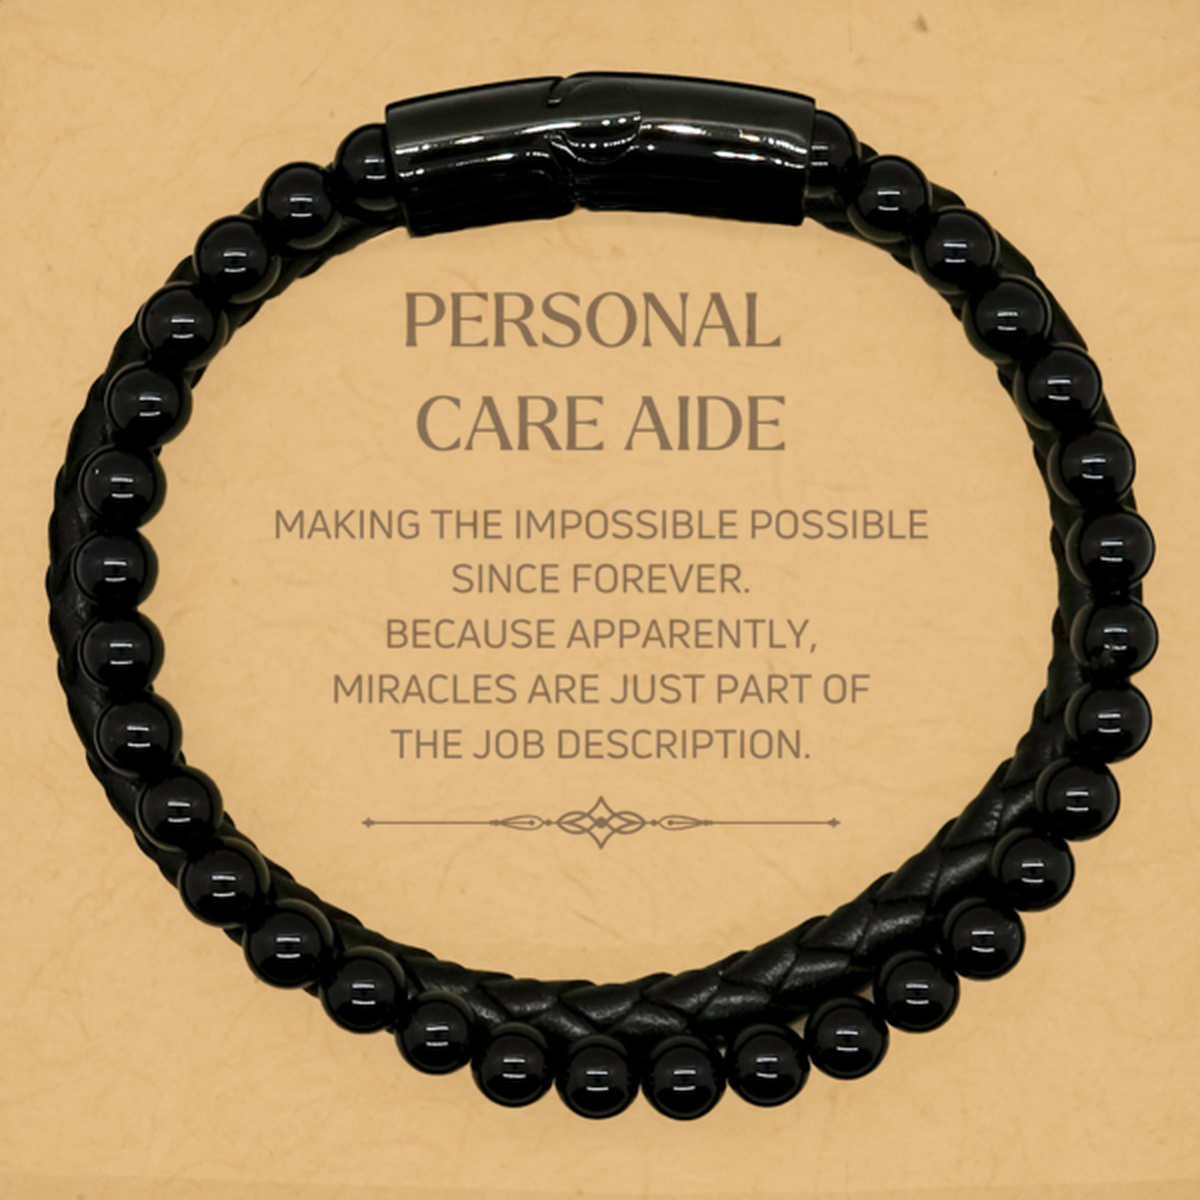 Funny Personal Care Aide Gifts, Miracles are just part of the job description, Inspirational Birthday Stone Leather Bracelets For Personal Care Aide, Men, Women, Coworkers, Friends, Boss